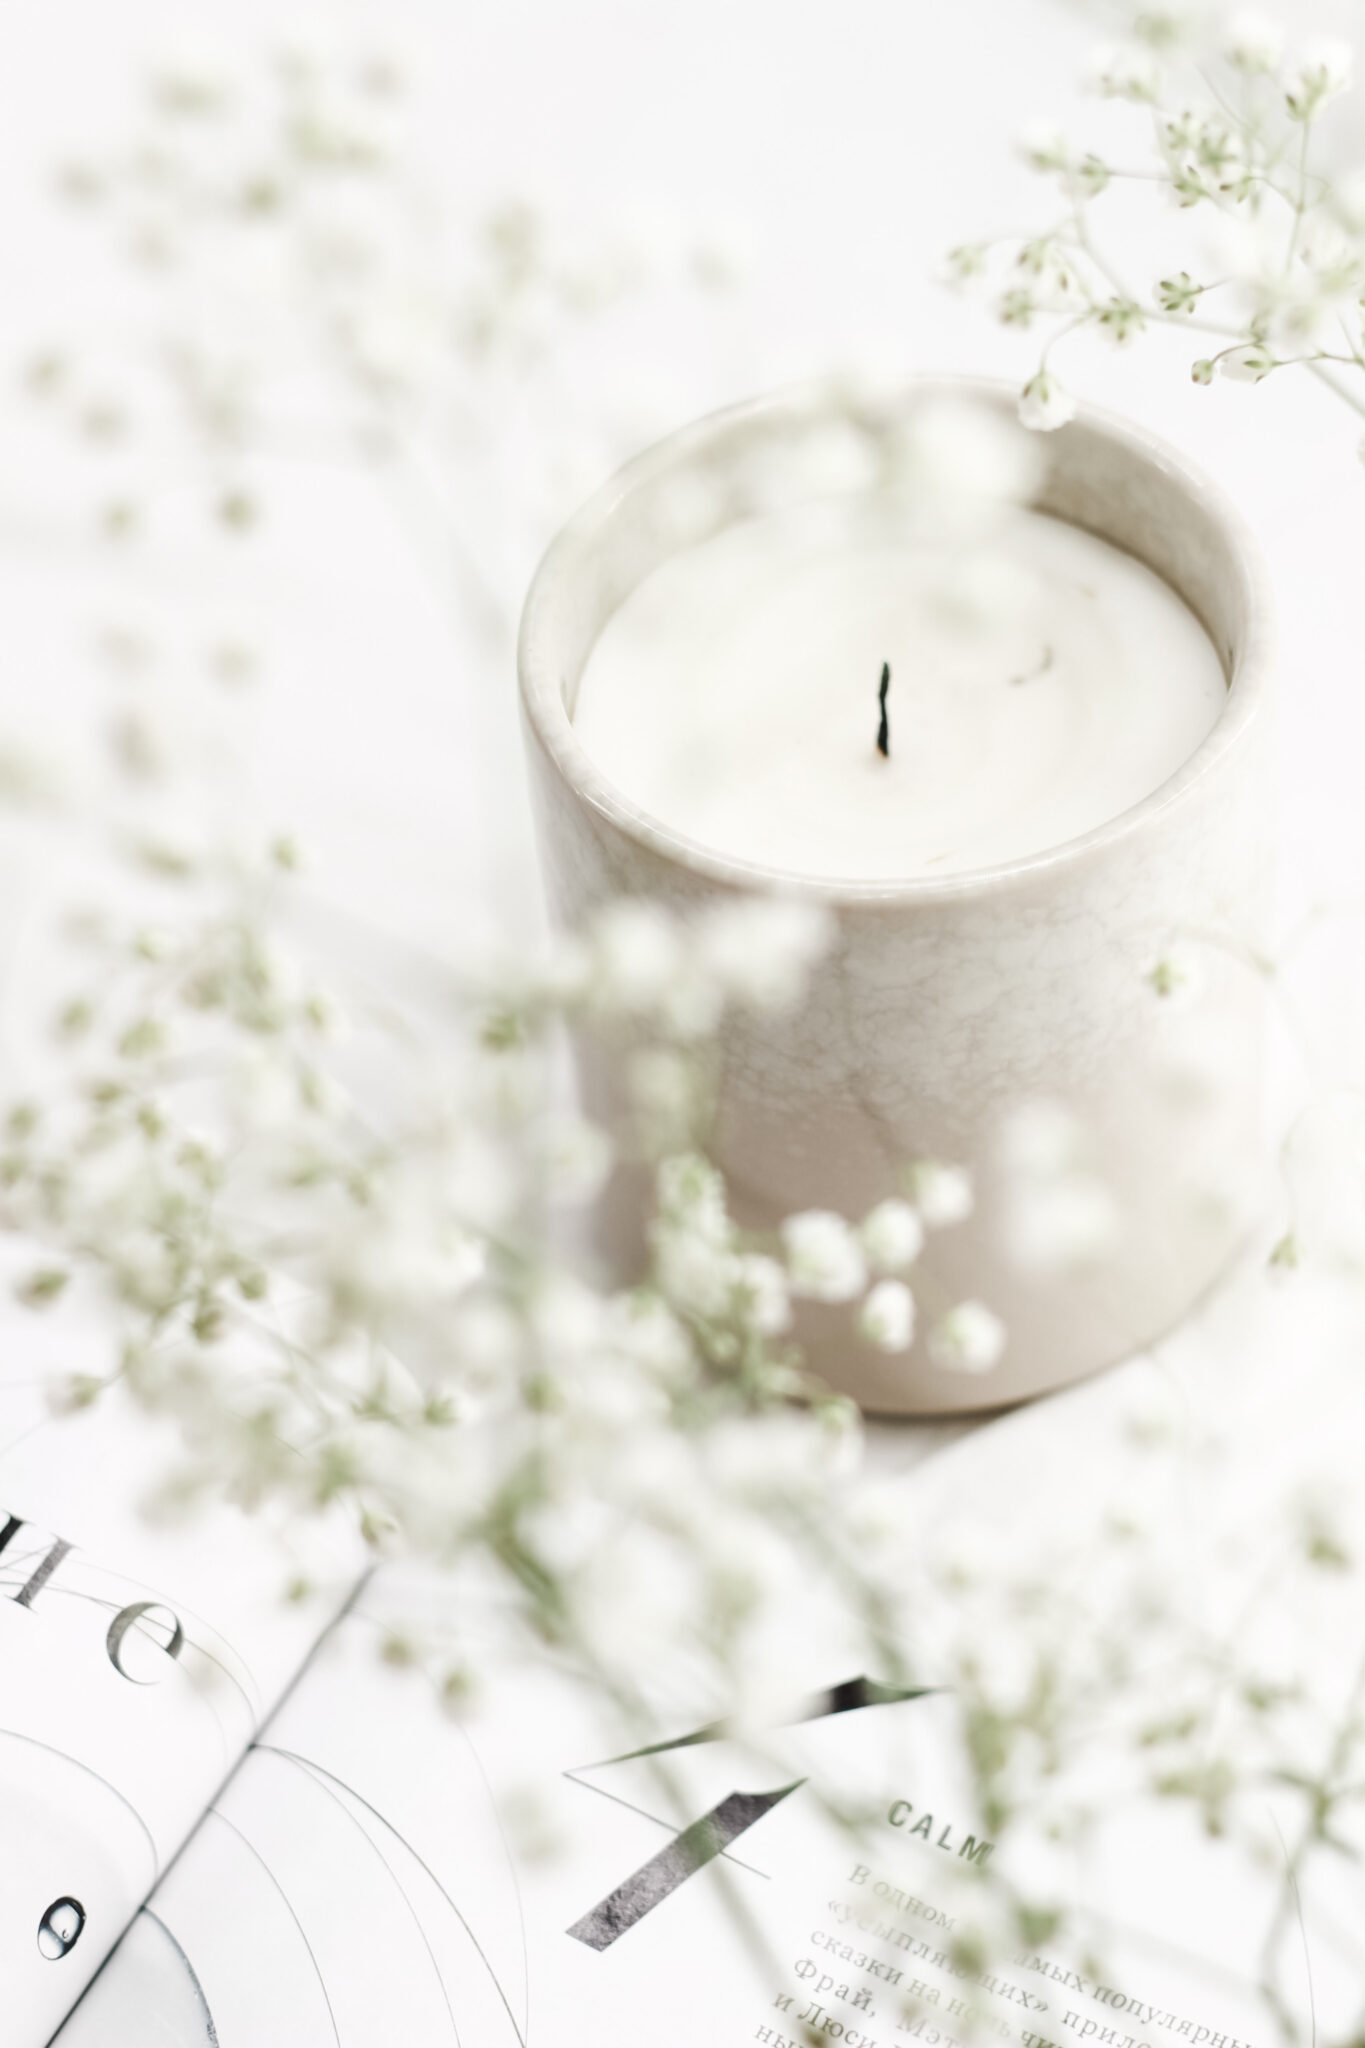 Beautiful little white flowers surround a candle. This article covers meaningful ways to pay tribute to parents.